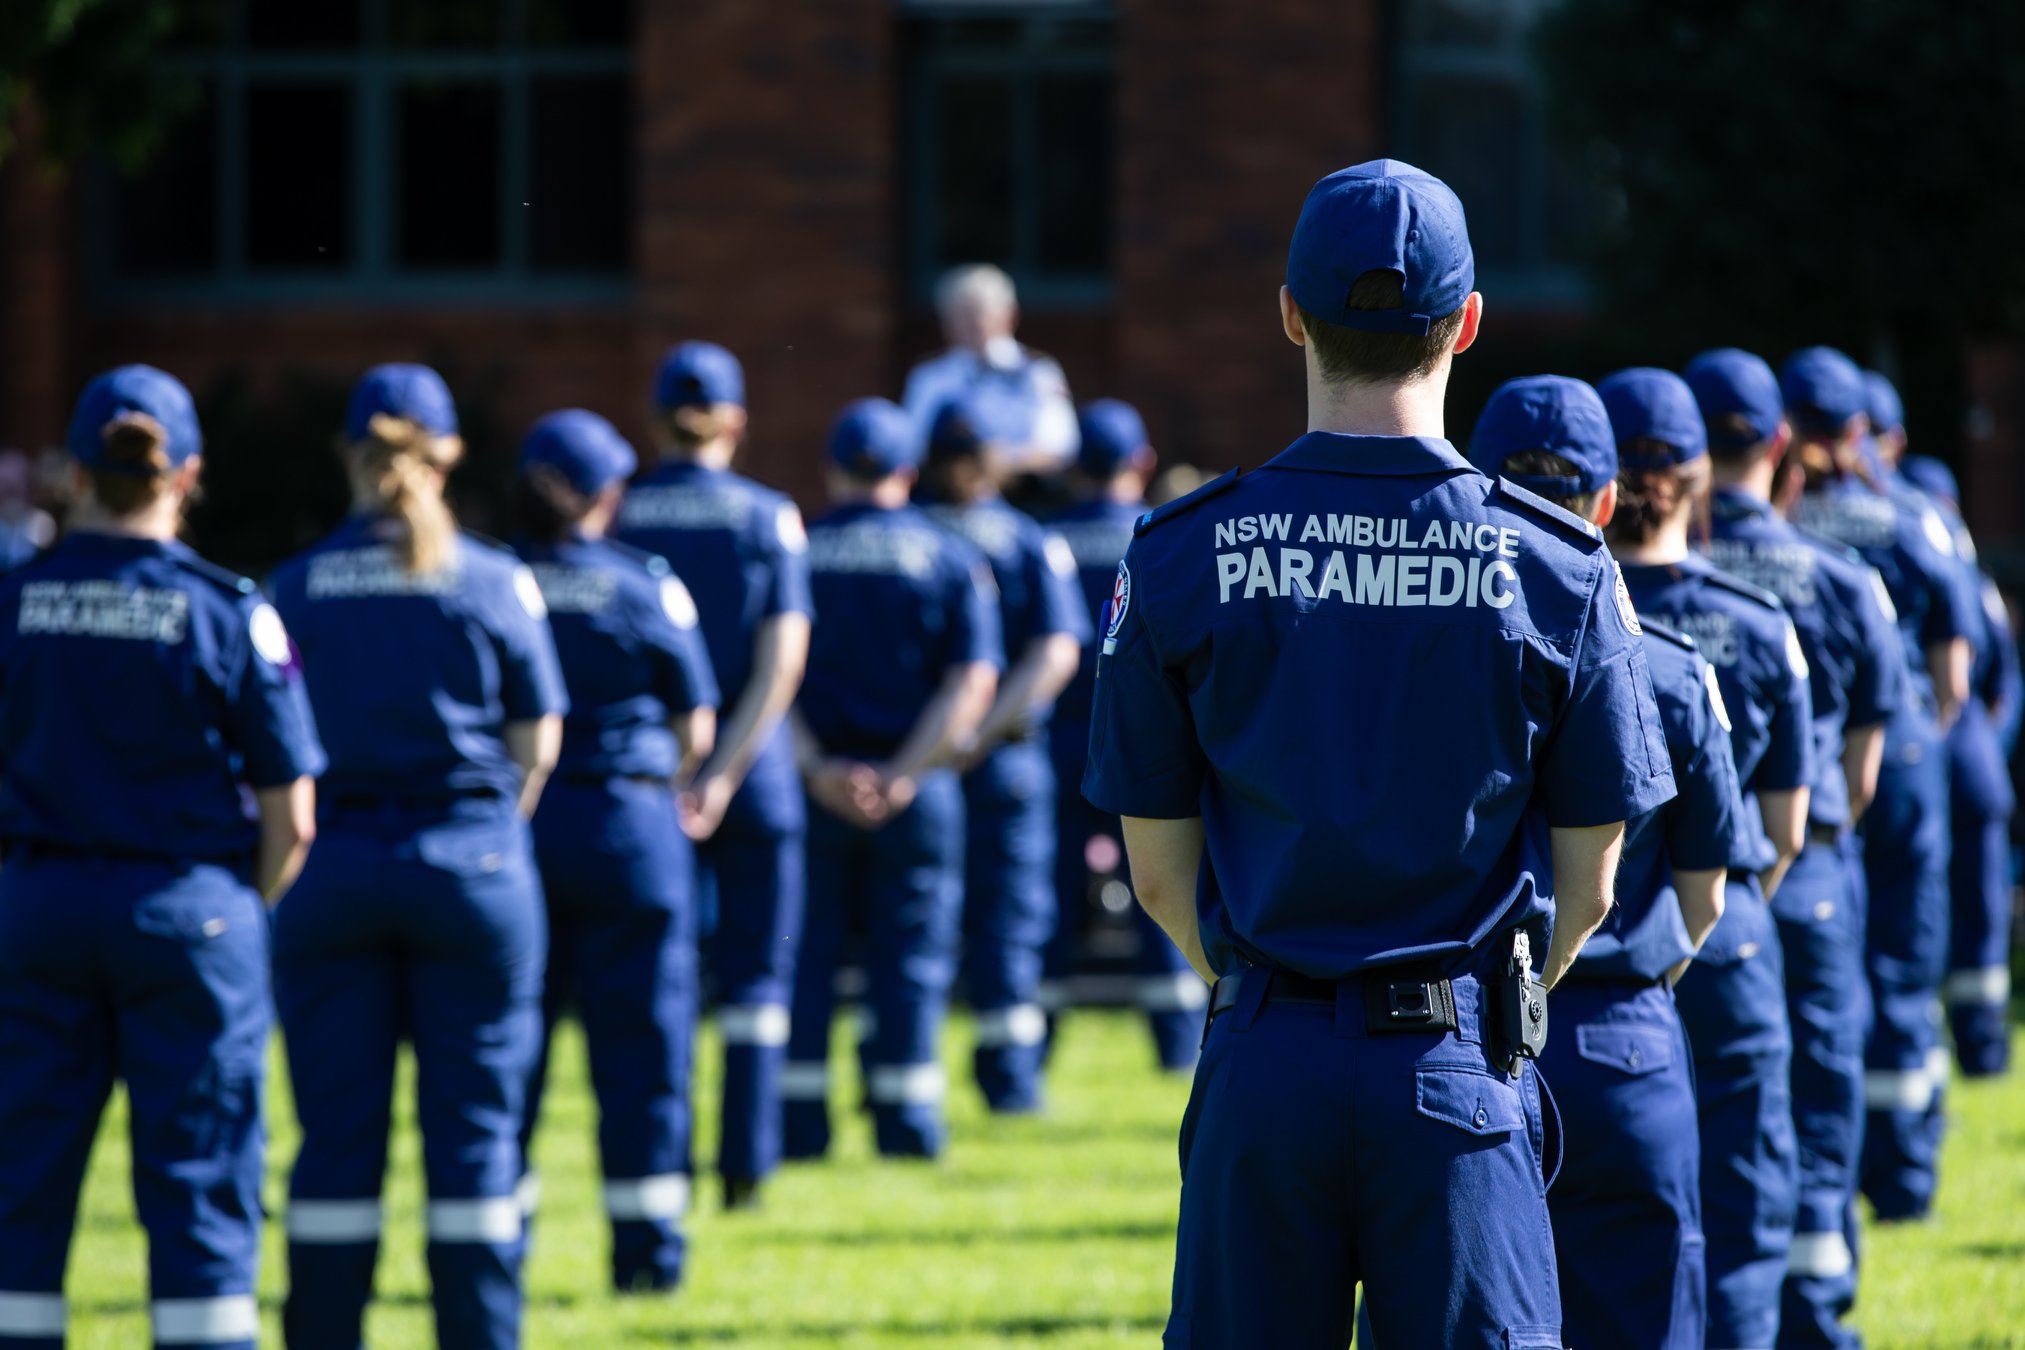 467-new-ambulance-paramedic-recruits-in-nsw-central-coast-news